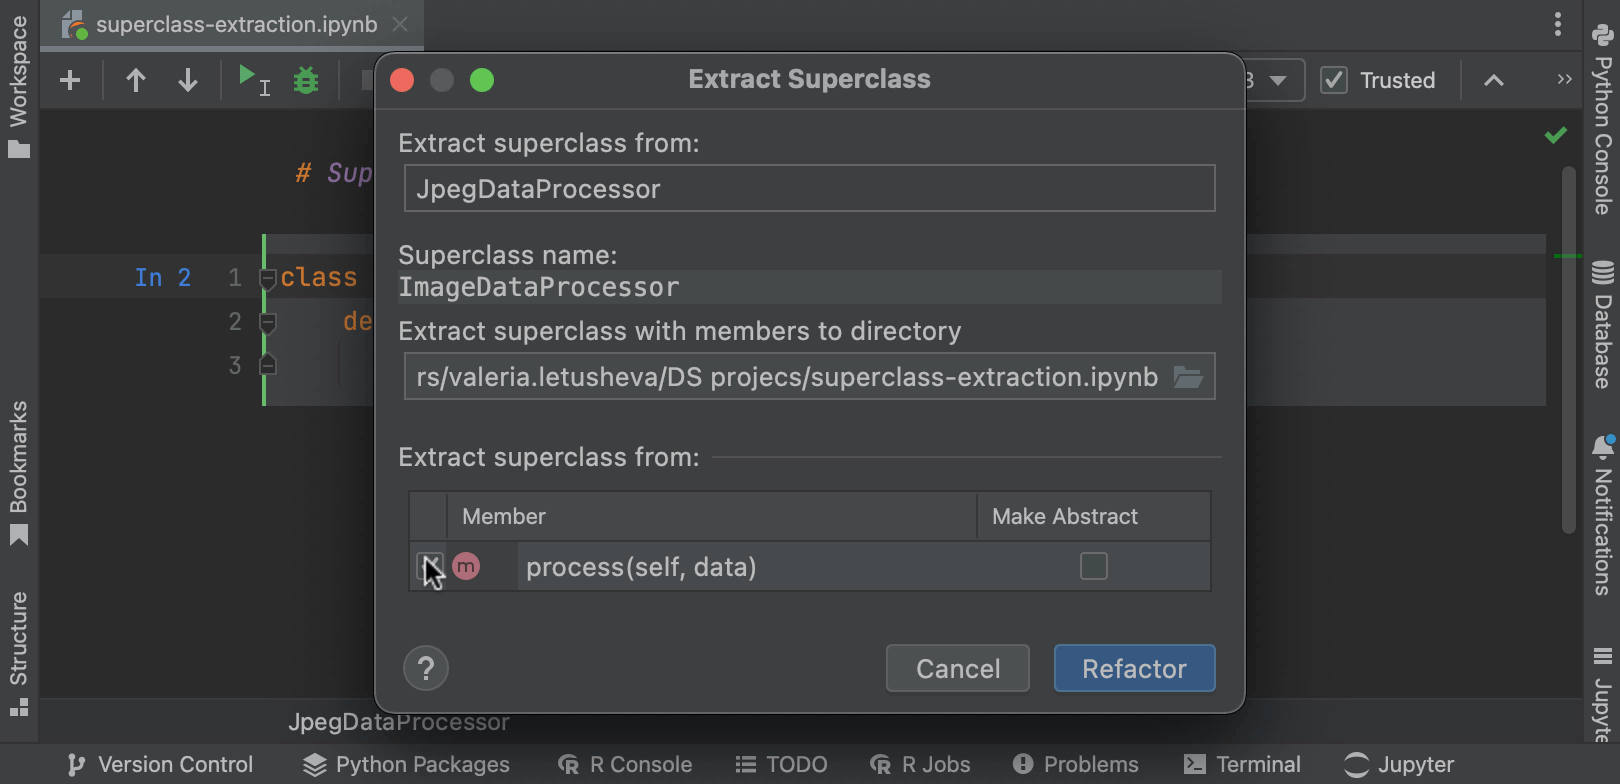 Extract Superclass in Jupyter notebooks